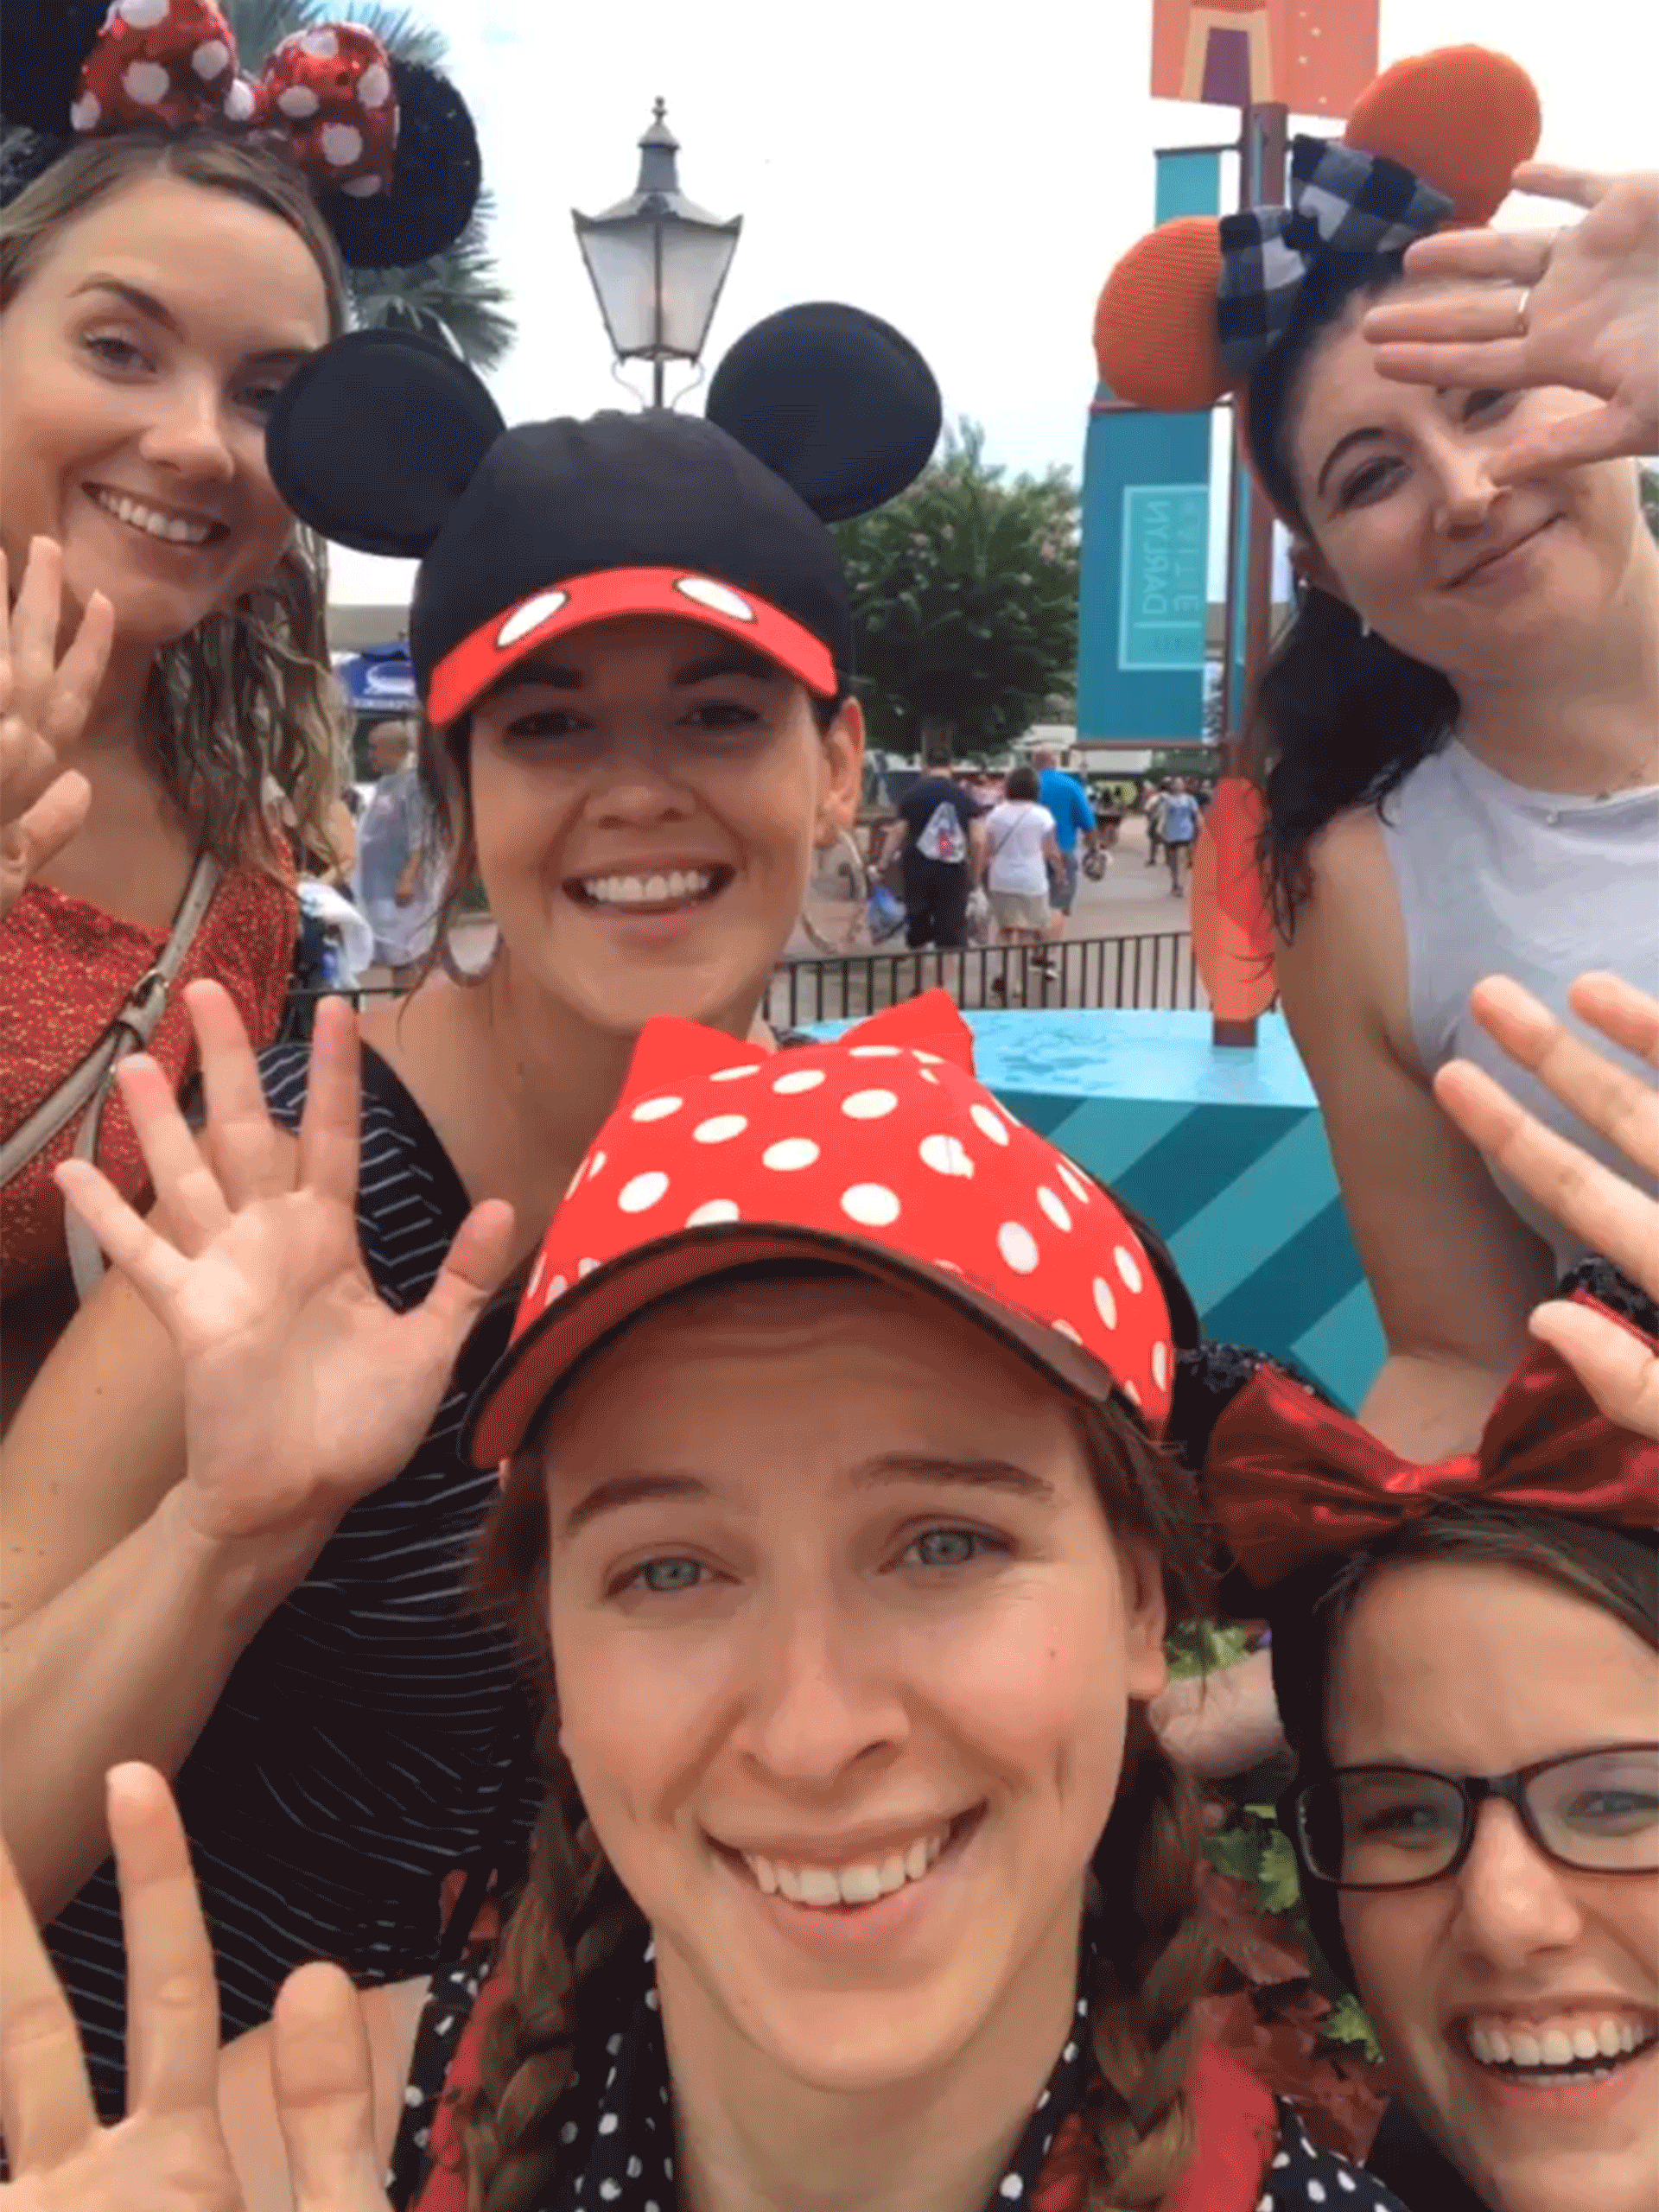 Five caucasian women wearing Mickey & Minnie ears wave at the camera.